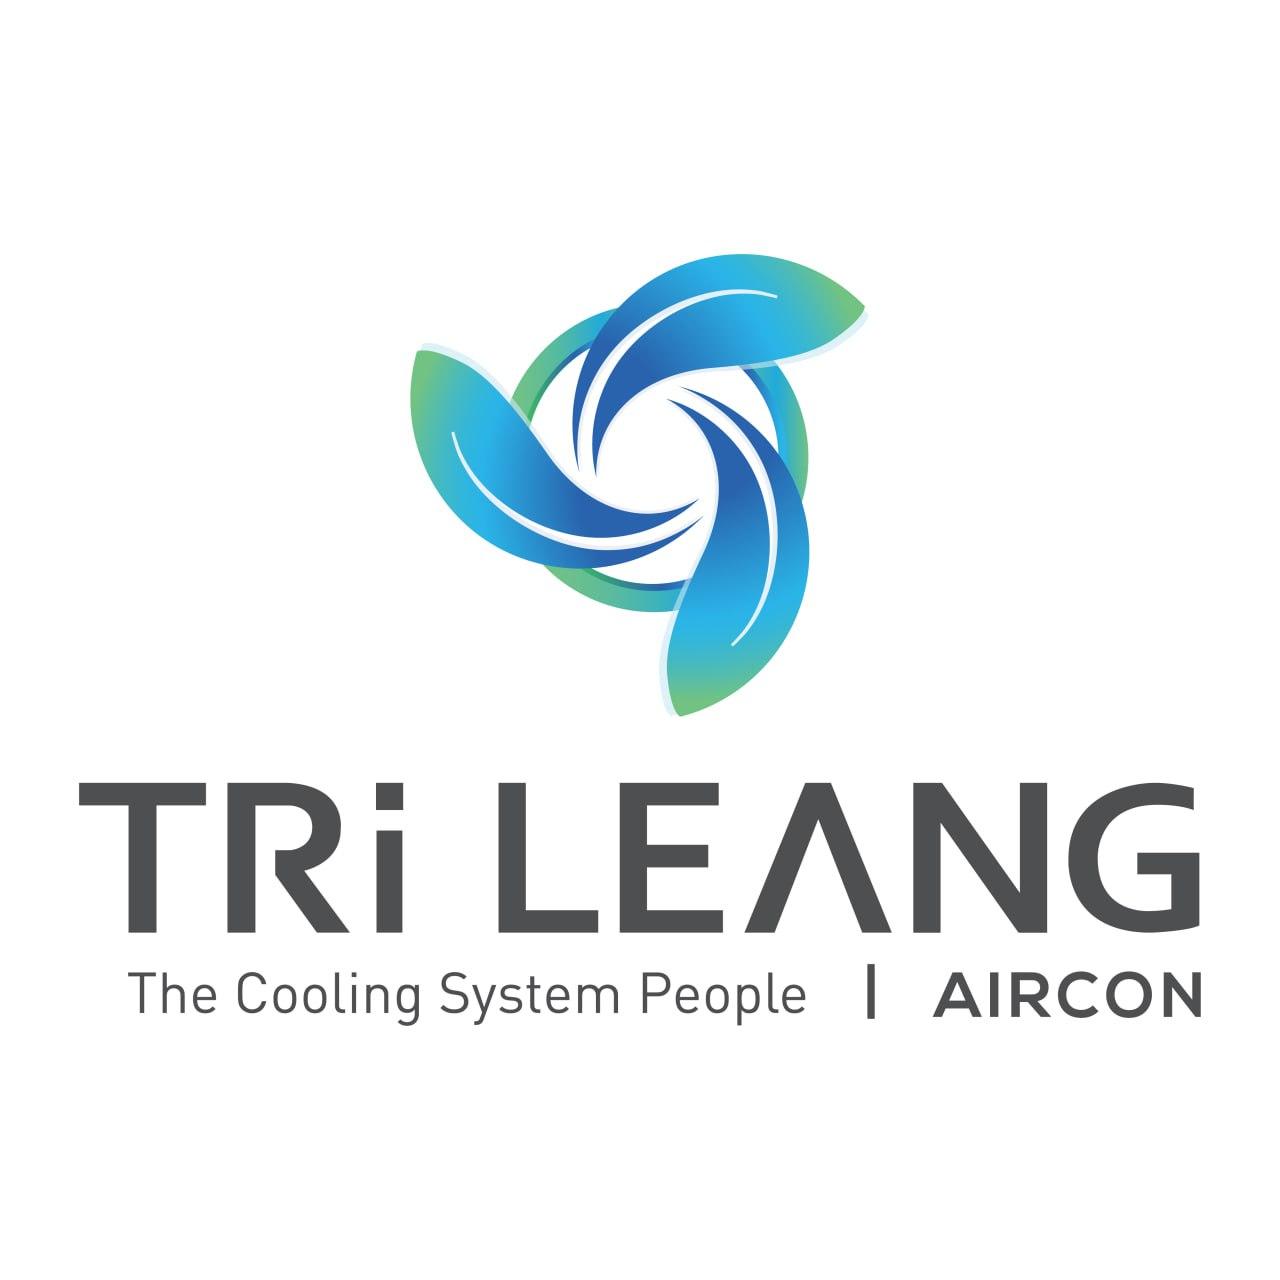 TRILEANG AIRCON